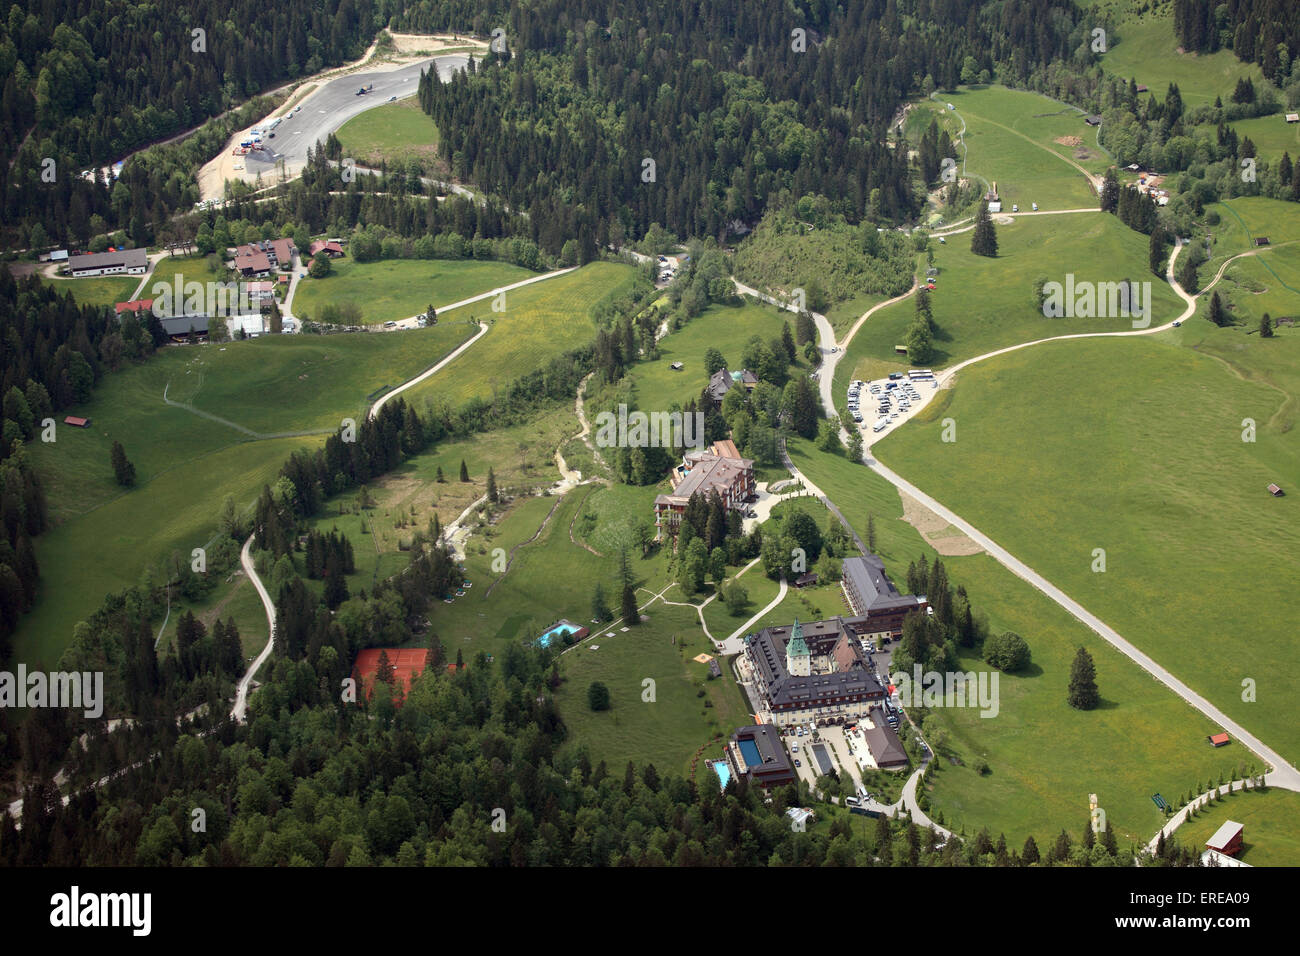 An aerial view shows the site of Schloss Elmau near Garmisch-Partenkirchen, Germany, 01 June 2015. The hotel facilities can be seen to the right in the foreground. In the center is the new construction with luxury suites where the top politicians will sleep and meet for conferences. The hotel is providing around 150 rooms and suites. In the background to the left is the new helicopter landing pad. State and government leaders from the G7 countries are meeting here on 07 and 08 June. Photo: LUFTBILD BERTRAM/dpa Stock Photo